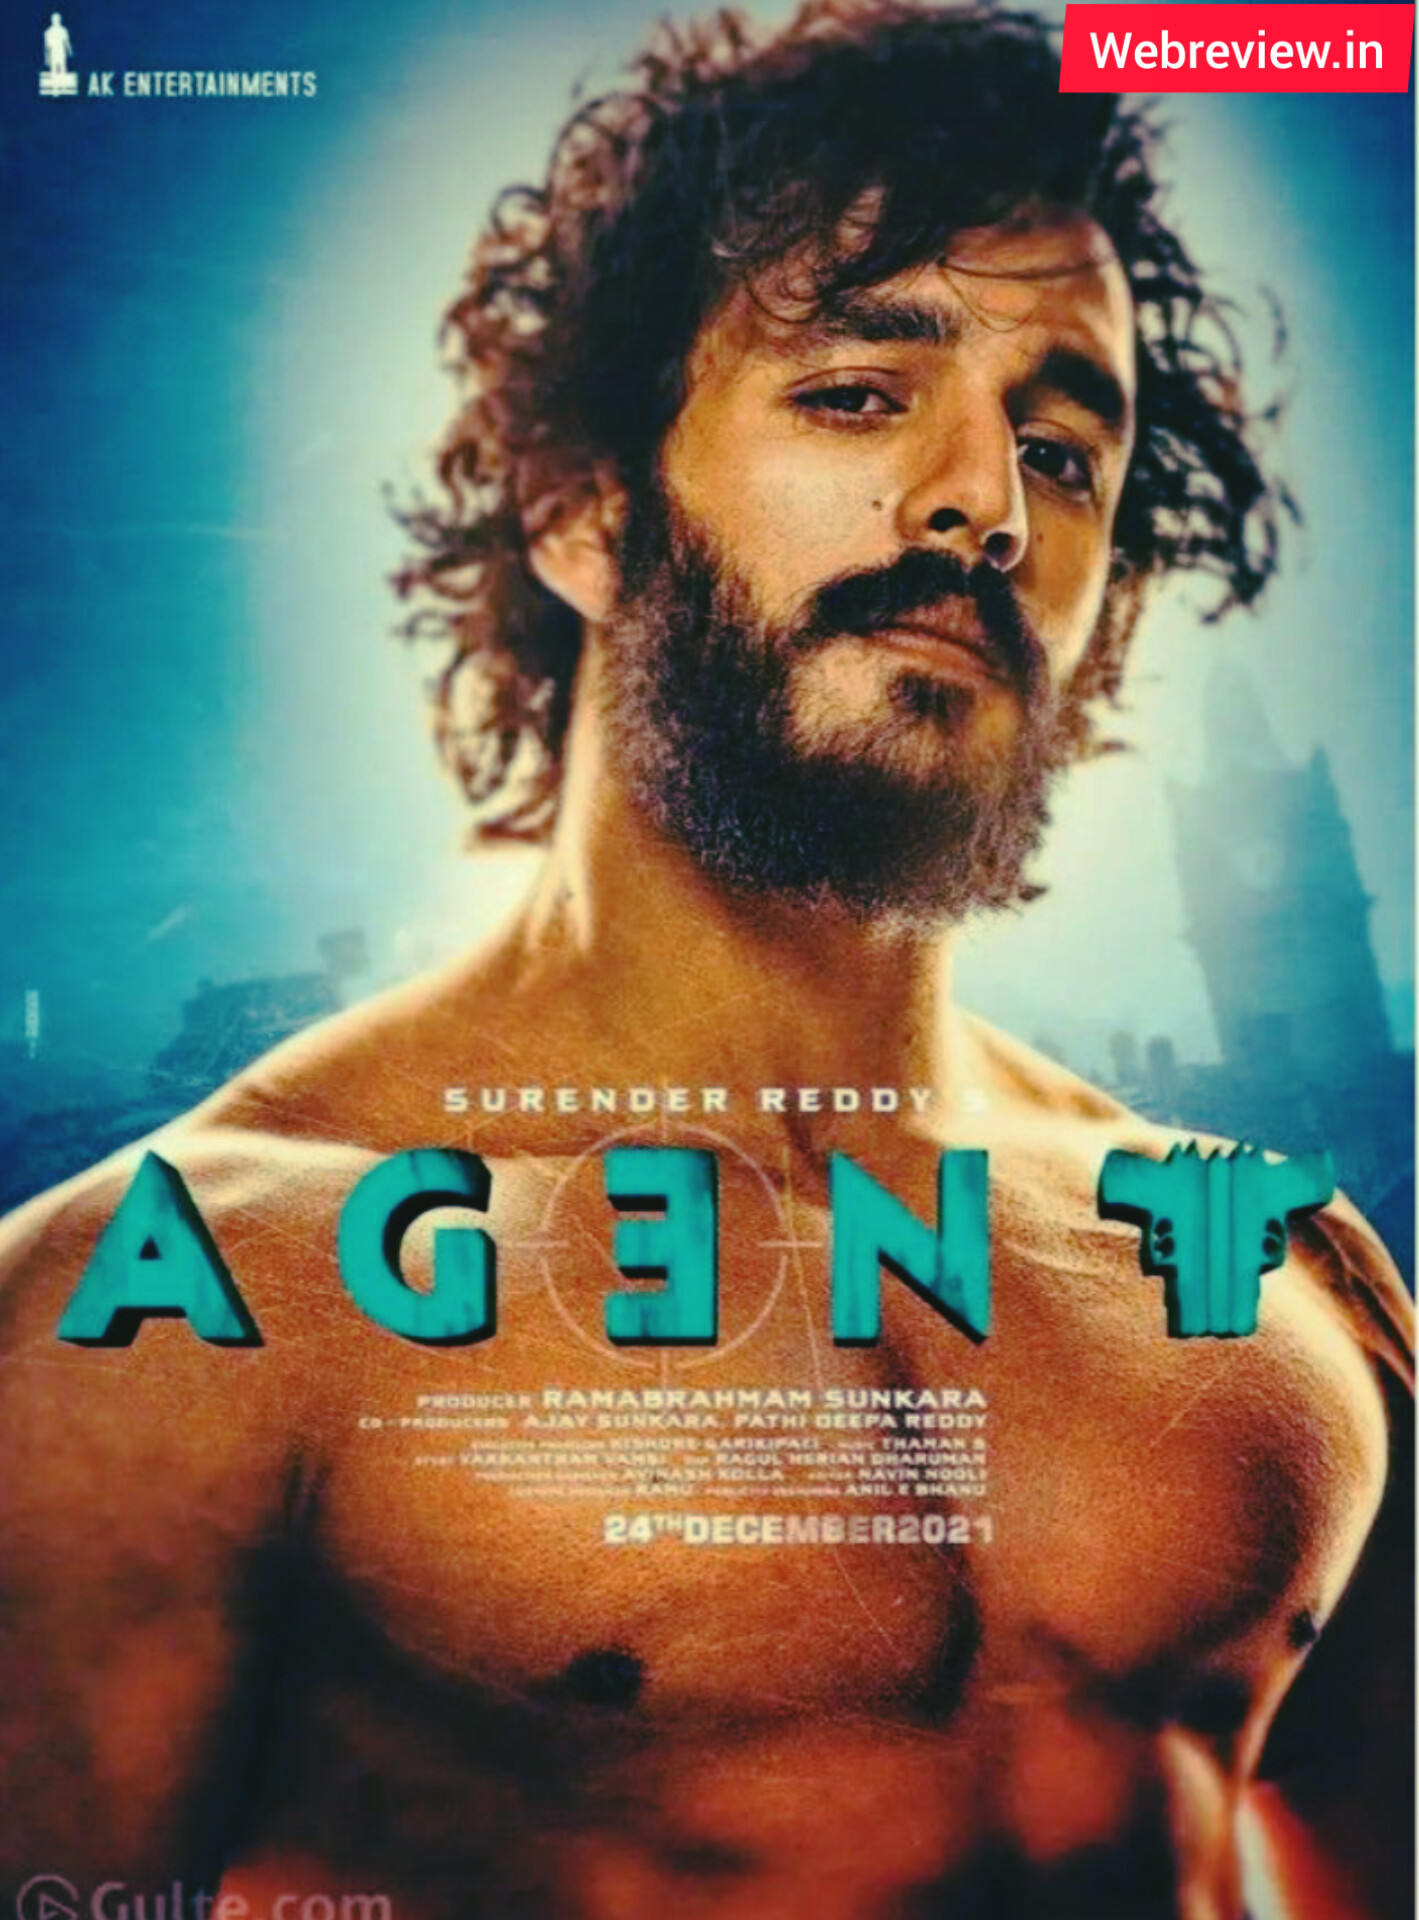 Agent Movie | Agent Cast & Crew, Story, Release Date, Trailer, Budget & Download